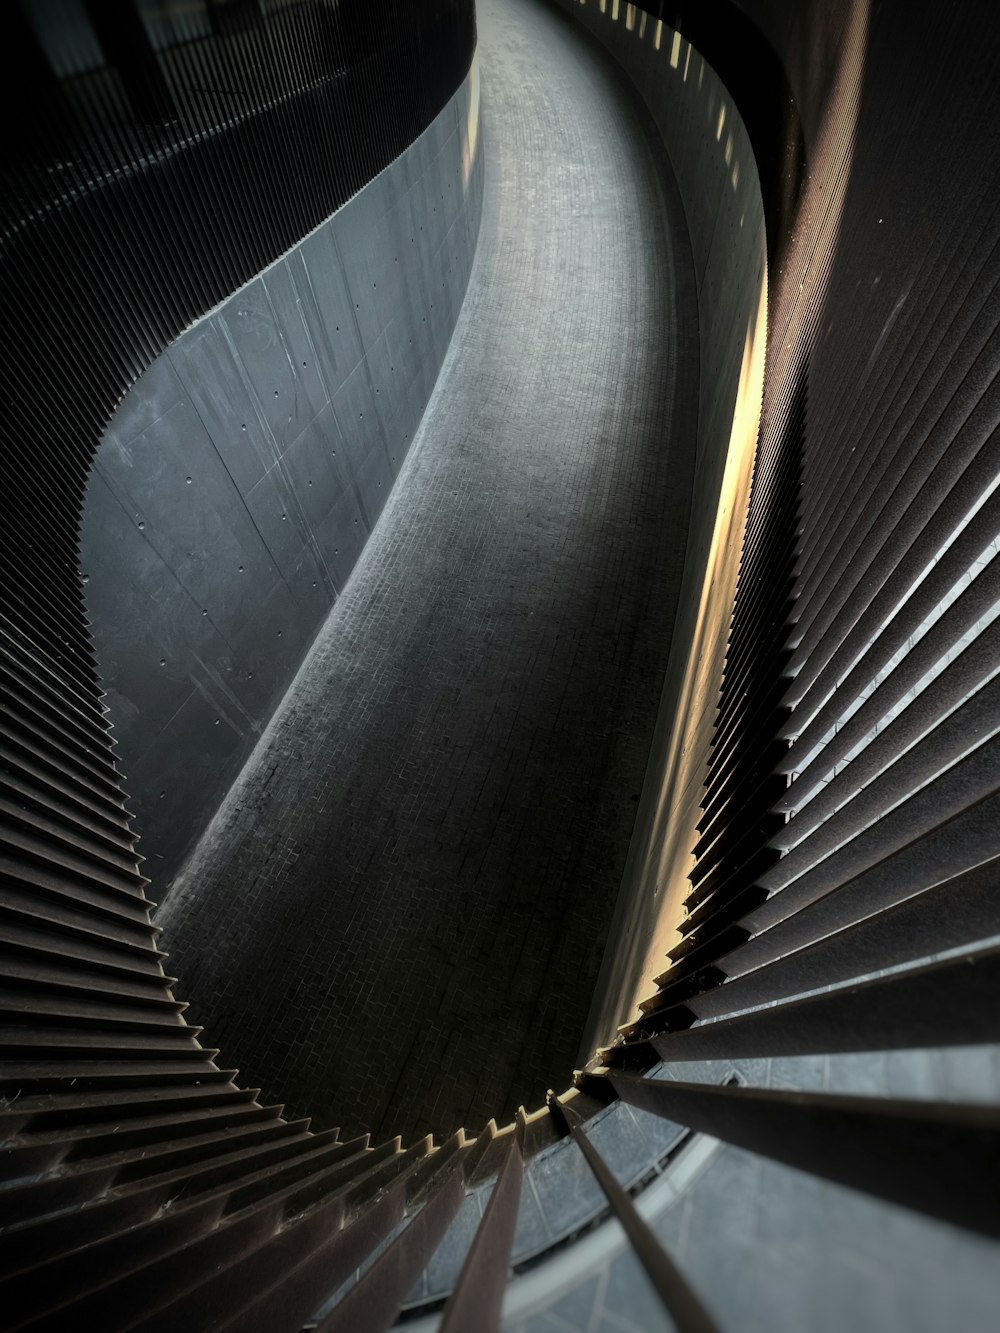 a spiral staircase in a building made of metal